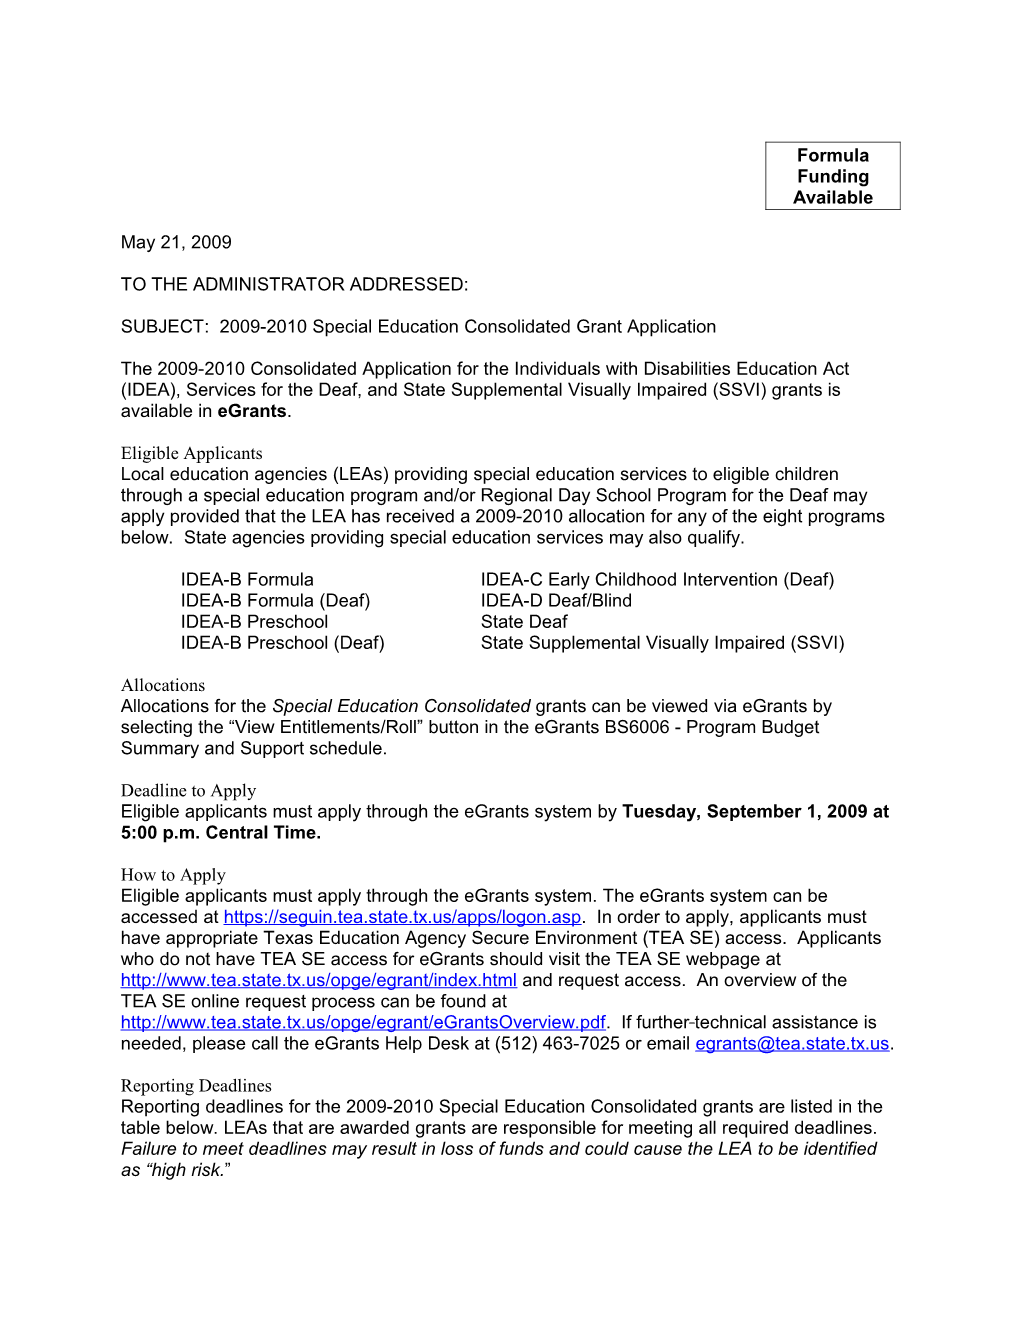 SUBJECT: 2009-2010Special Education Consolidated Grant Application